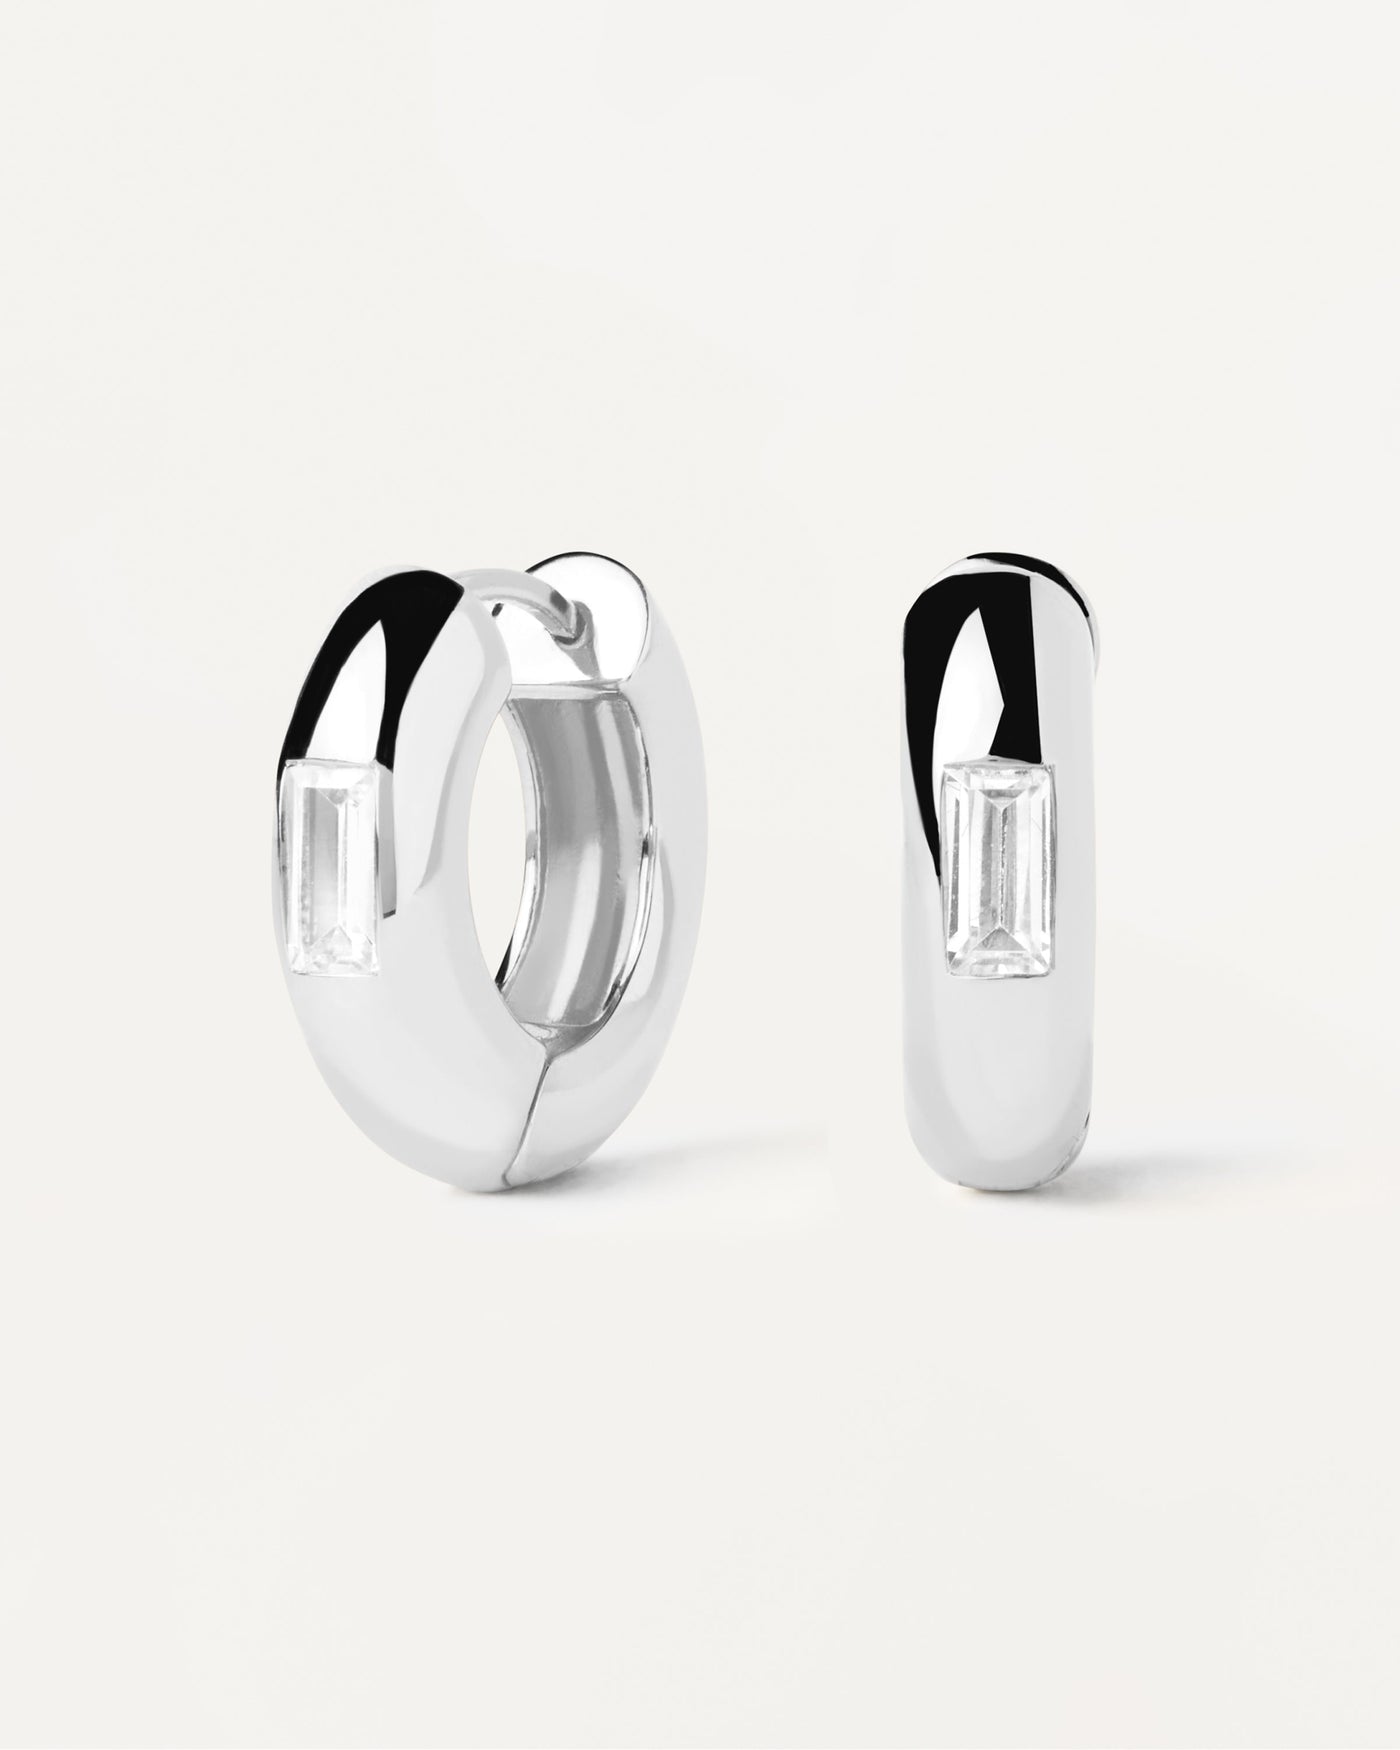 2023 Selection | Kali Silver Hoop Earrings. Bold hoop earrings in sterling silver with rectangular white zirconia. Get the latest arrival from PDPAOLA. Place your order safely and get this Best Seller. Free Shipping.